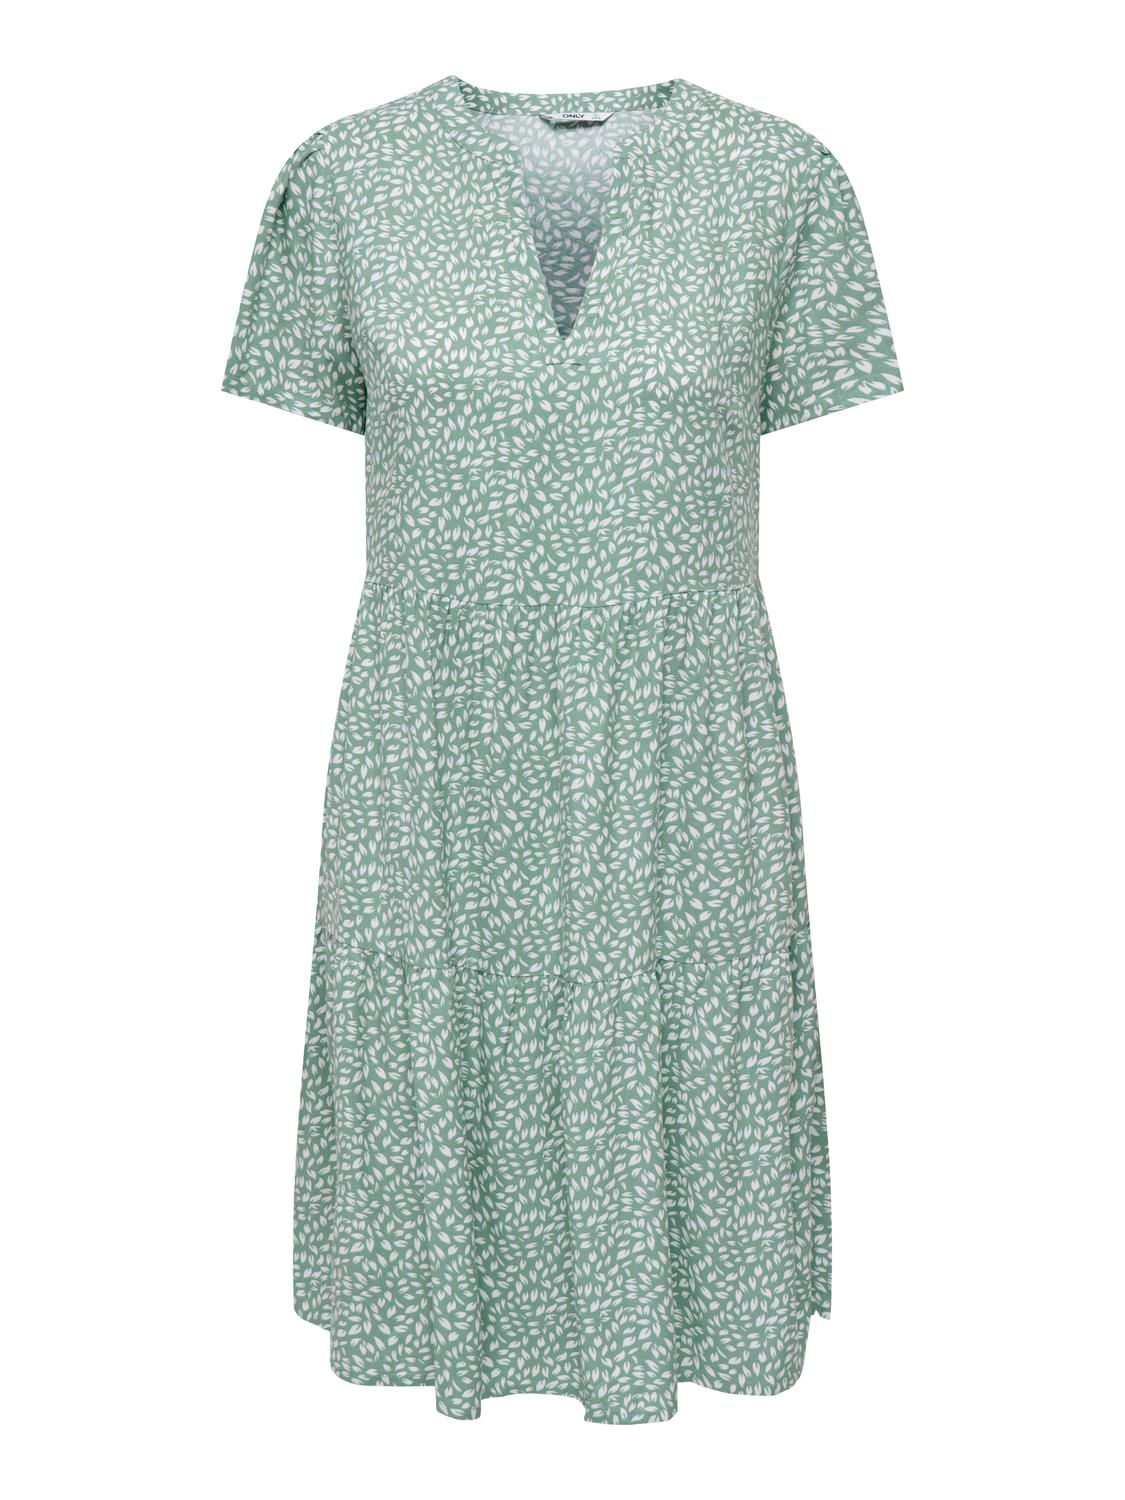 Only ONLZALLY LIFE S/S THEA DRESS NOOS P Chinois Green/White leafs 00108788-EKA26011400001822